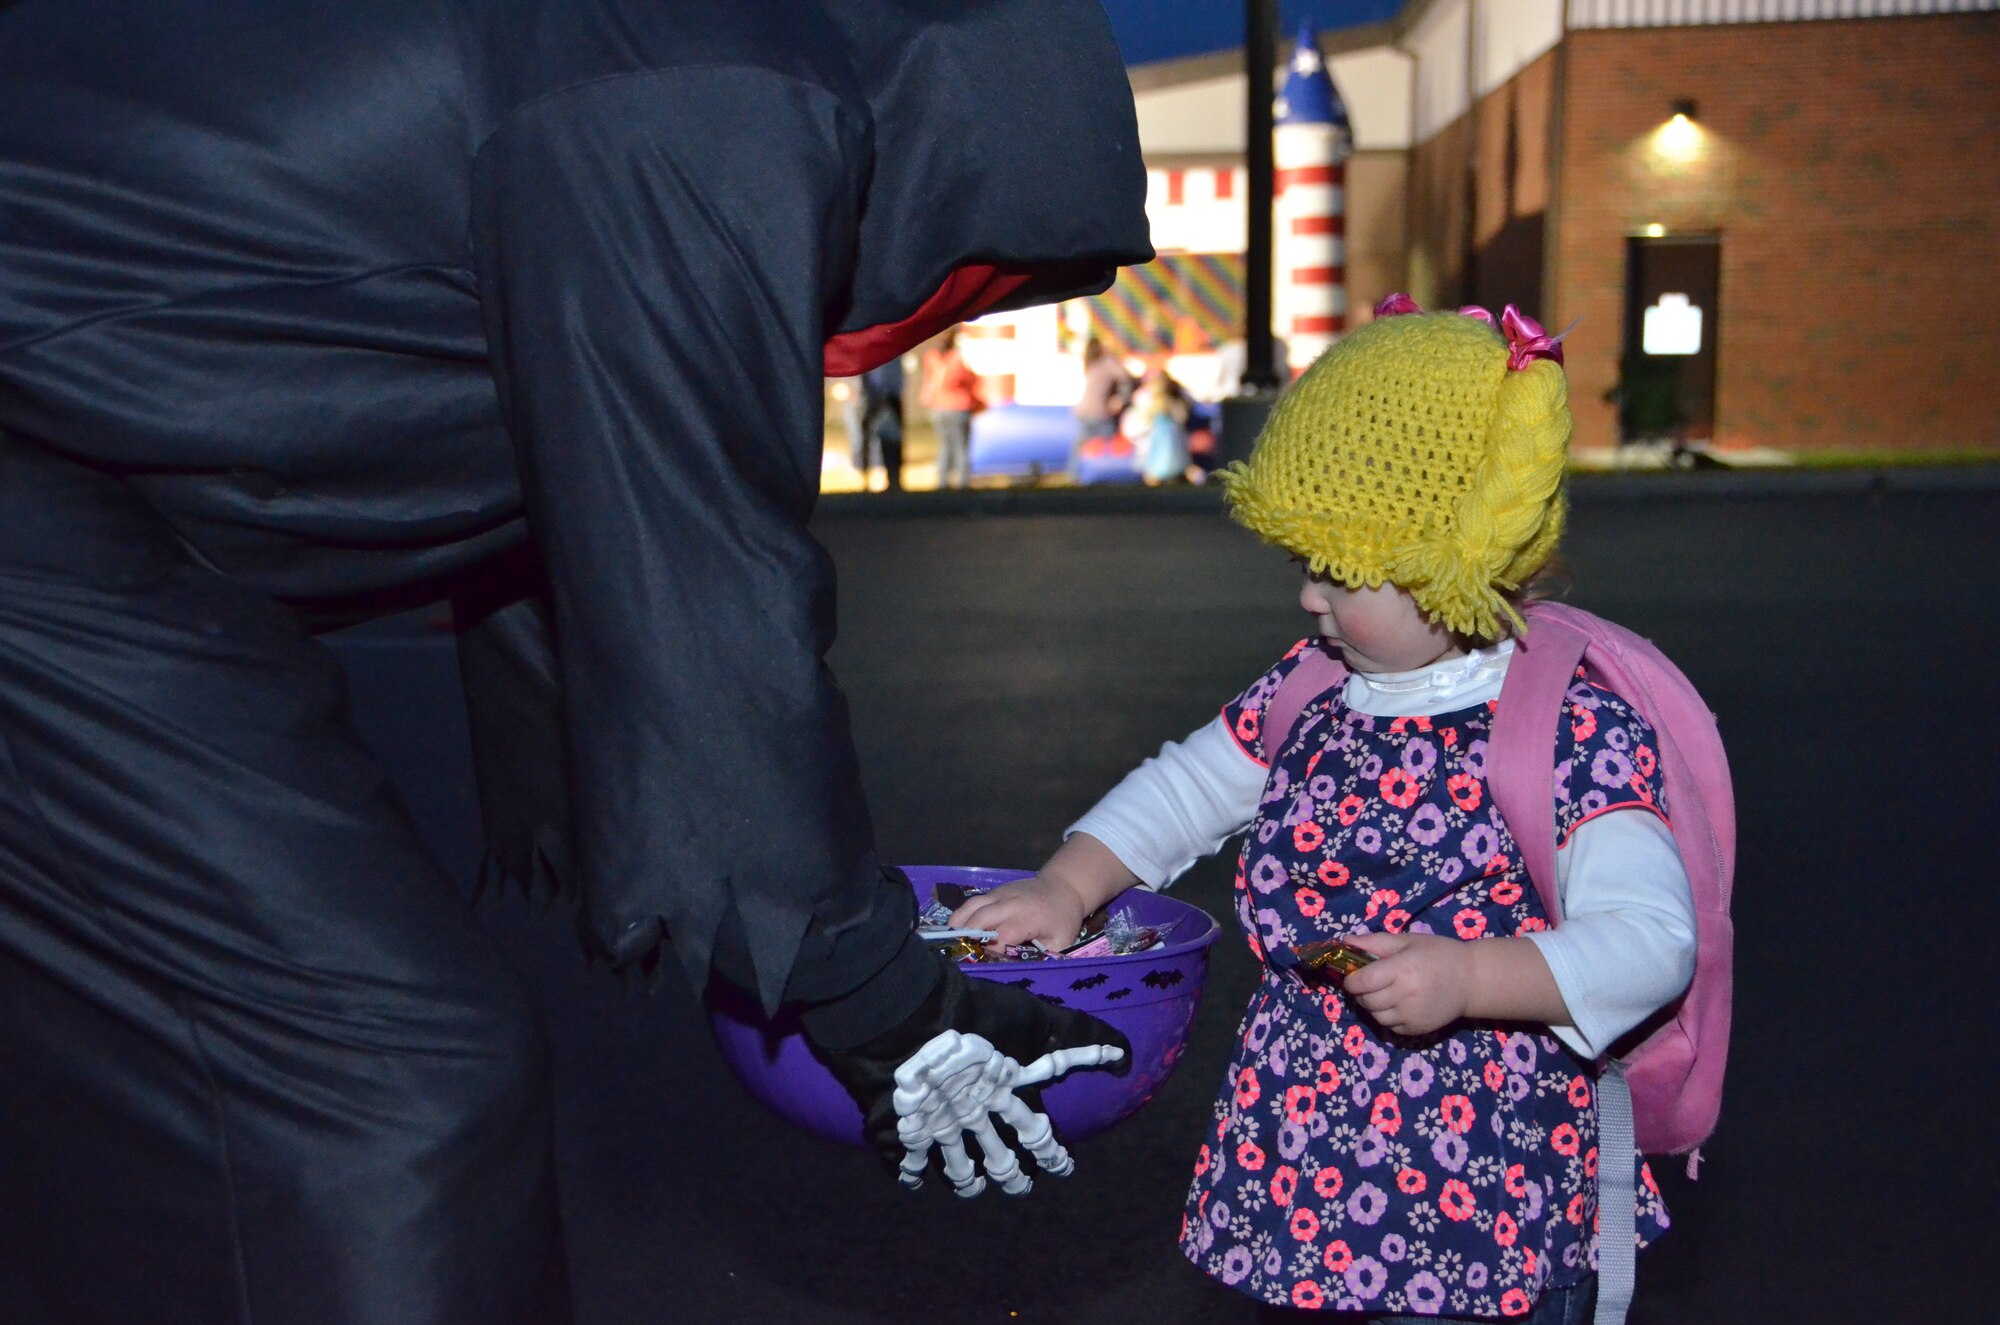 Lylah Chadbourne, 1, daughter of Tech. Sgt. Morgan Chadbourne, a resource advisor for the 103rd Maintenance Group, grabs a handful of candy form a spooky robed skeleton during the first-ever Trunk or Treat event held at Bradley Air National Guard Base, East Granby, Conn., Oct. 28, 2014.  The event was arranged by the Connecticut National Guard’s Child and Youth Program and staffed by volunteers who dressed up their car trunks with Halloween decorations. (U.S. Air National Guard photo by Tech. Sgt. Joshua Mead)